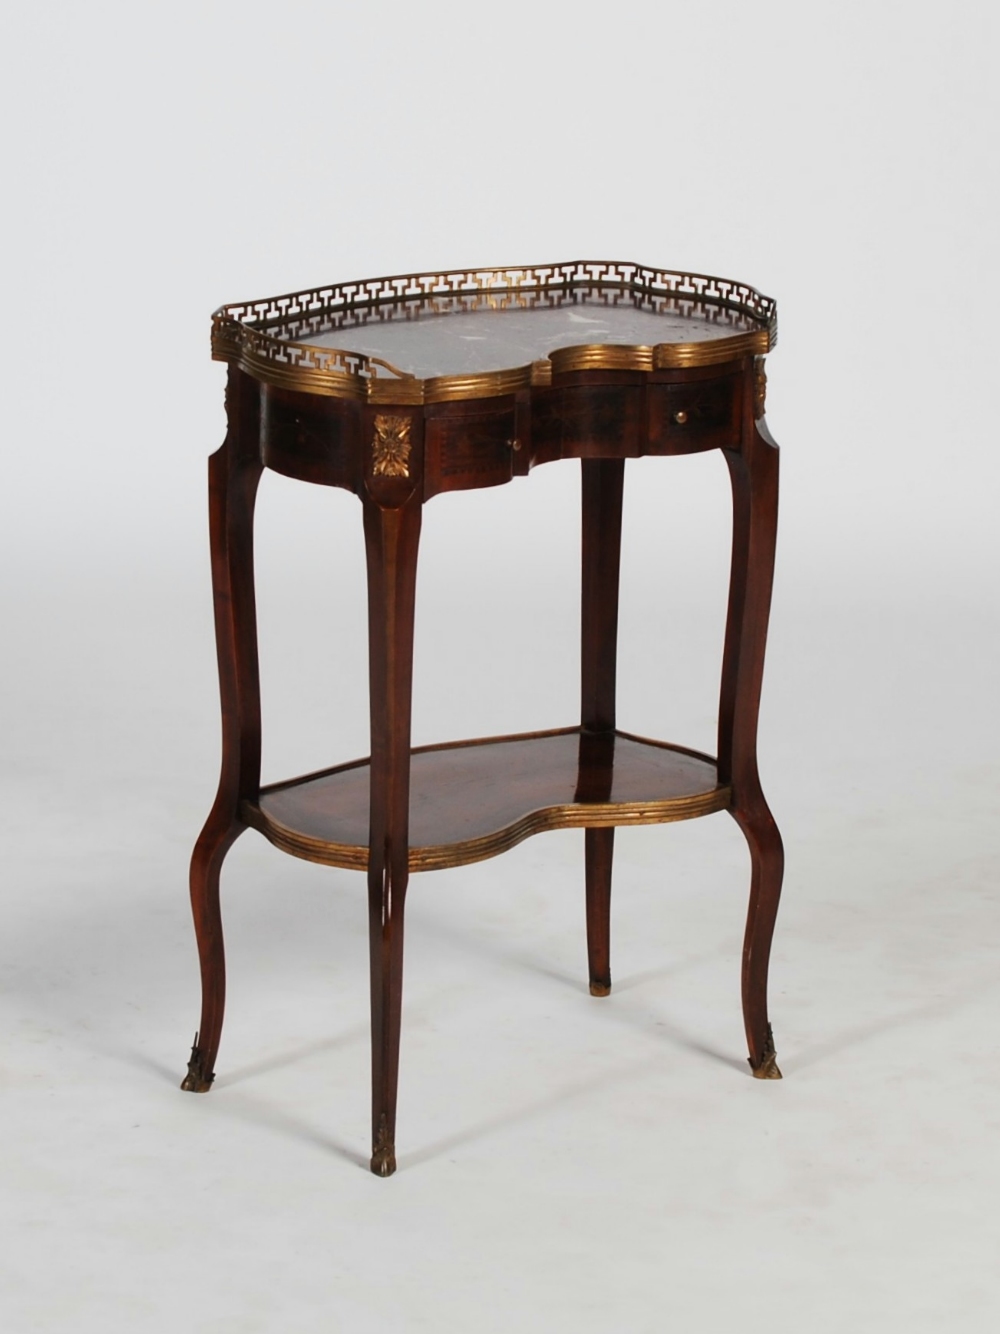 A Continental kingwood, marquetry and gilt metal mounted occasional table, the mottled purple and